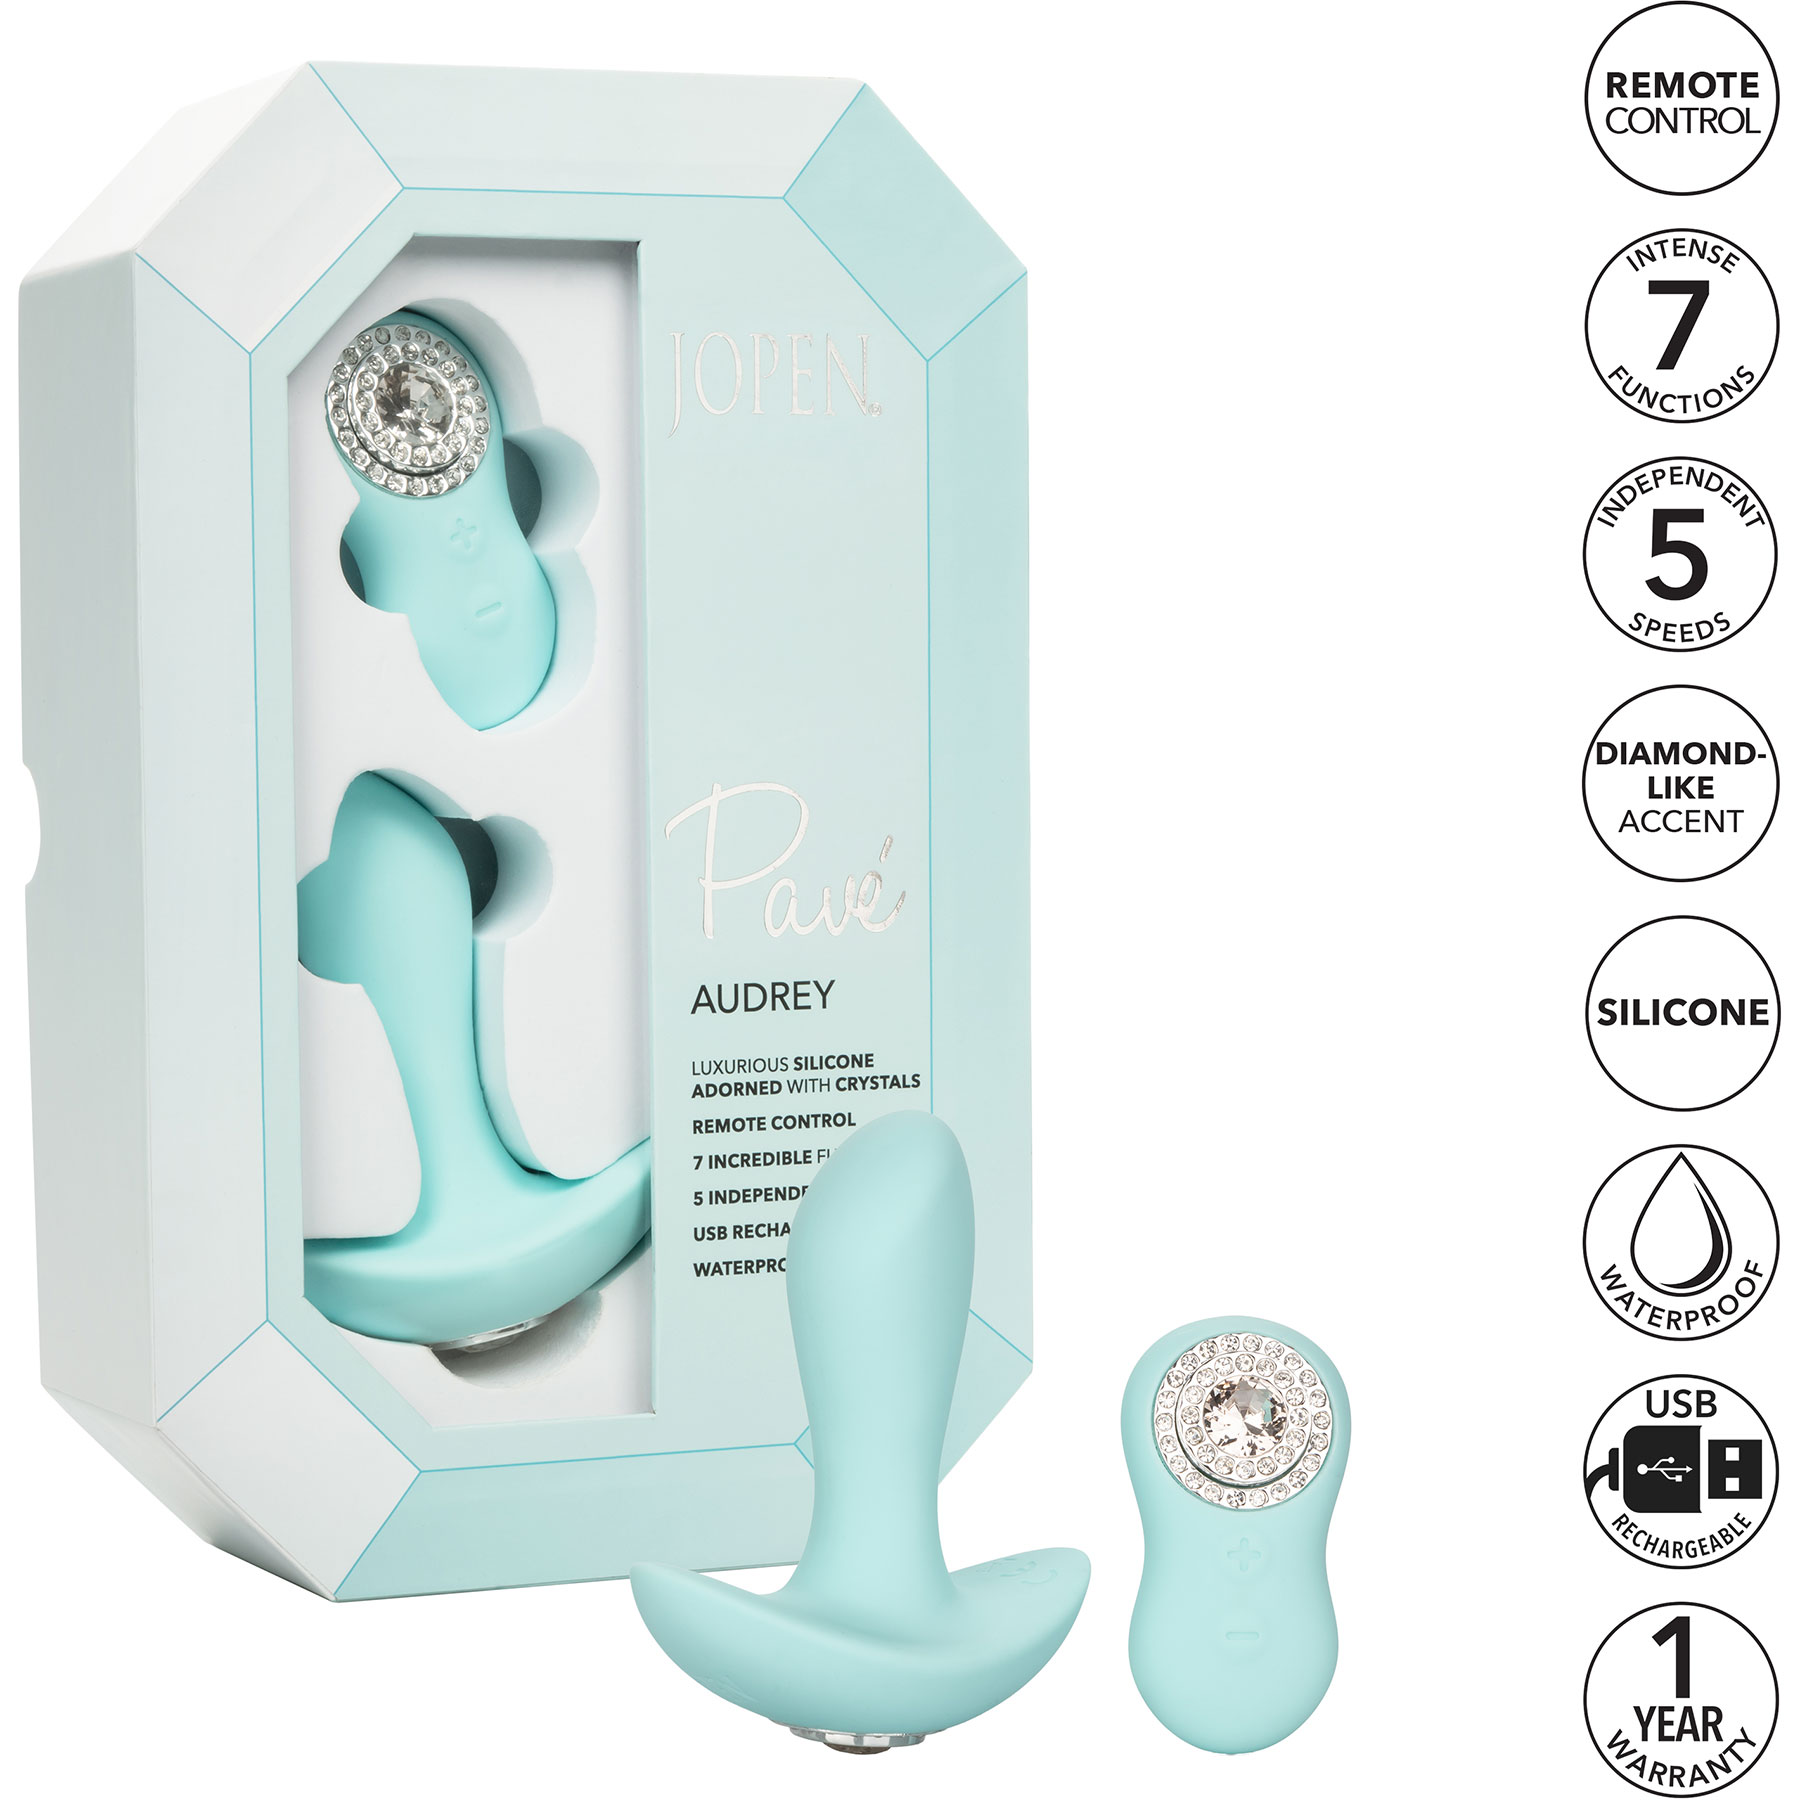 Pave Audrey Rechargeable Waterproof Silicone Anal Stimulator - Features